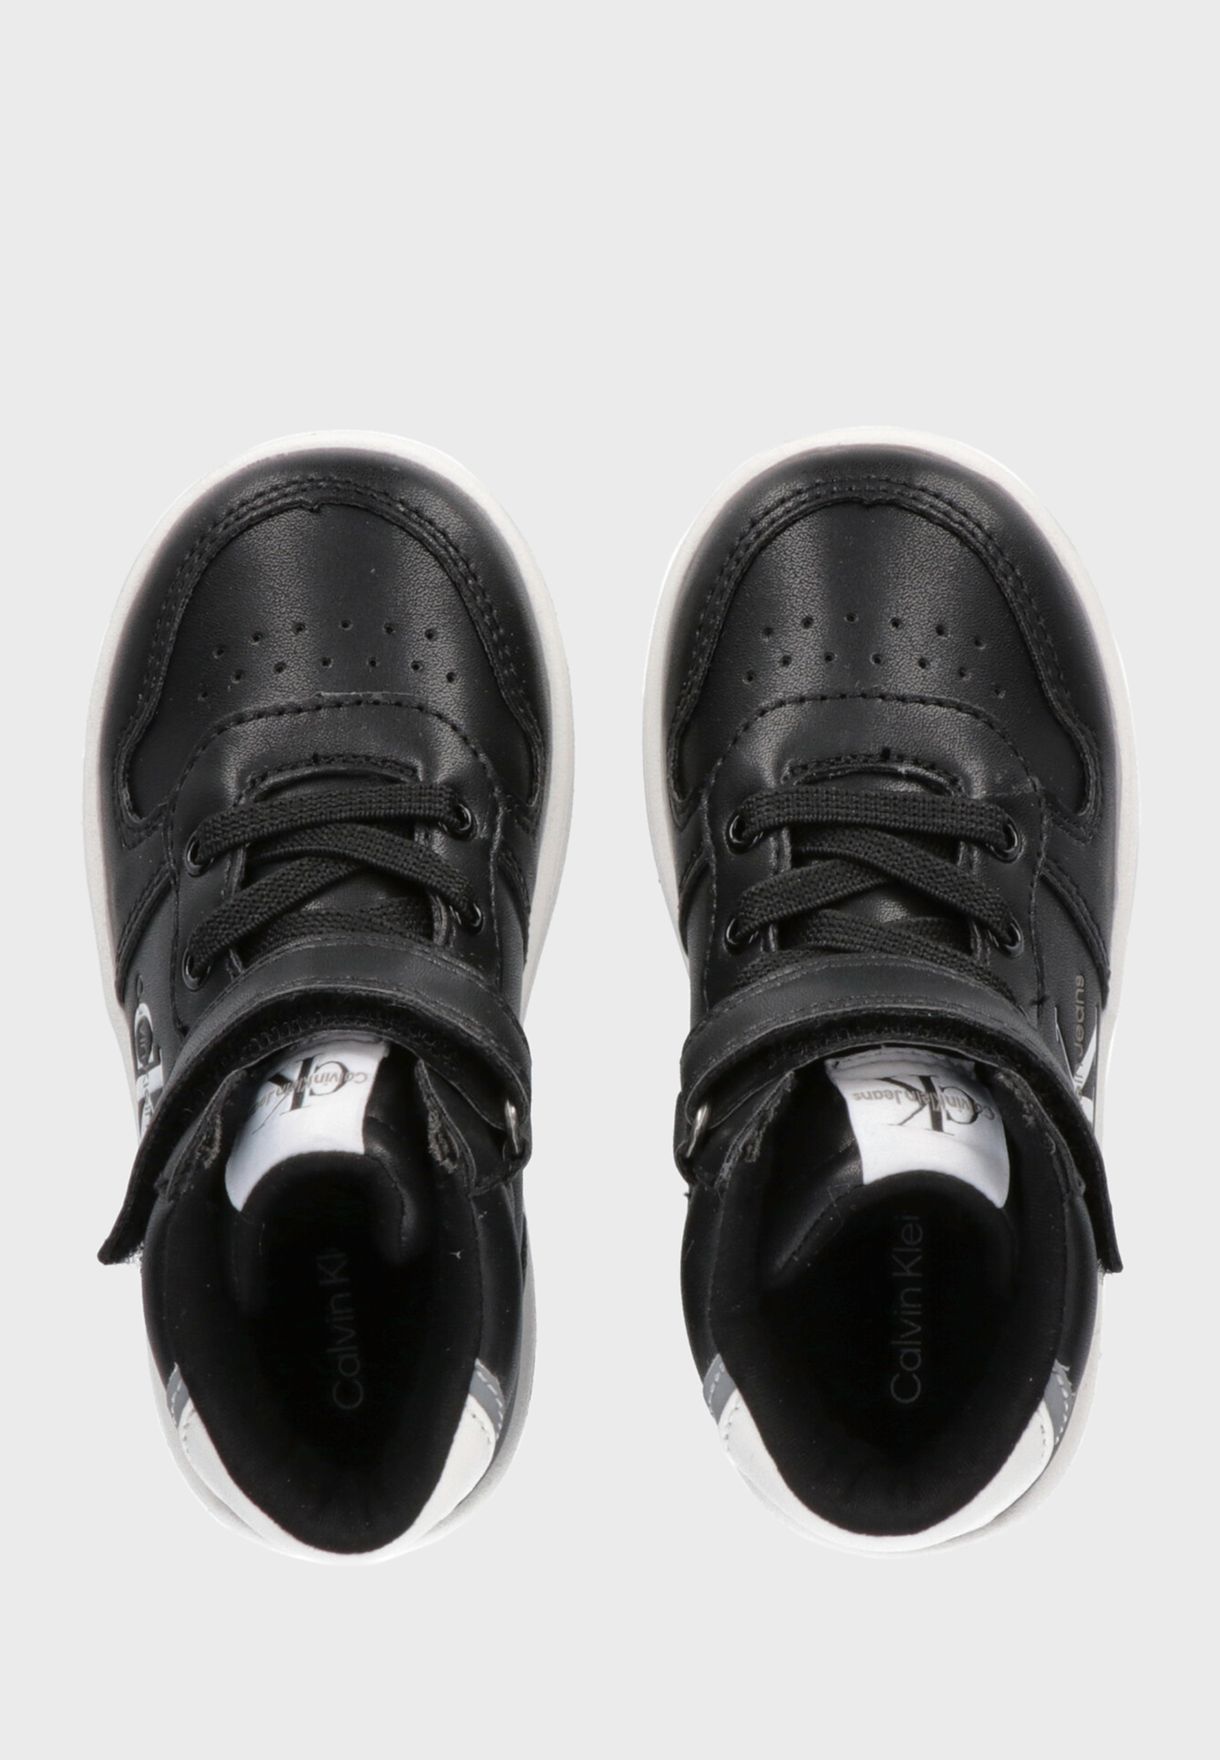 Youth High Top Velcro Sneakers